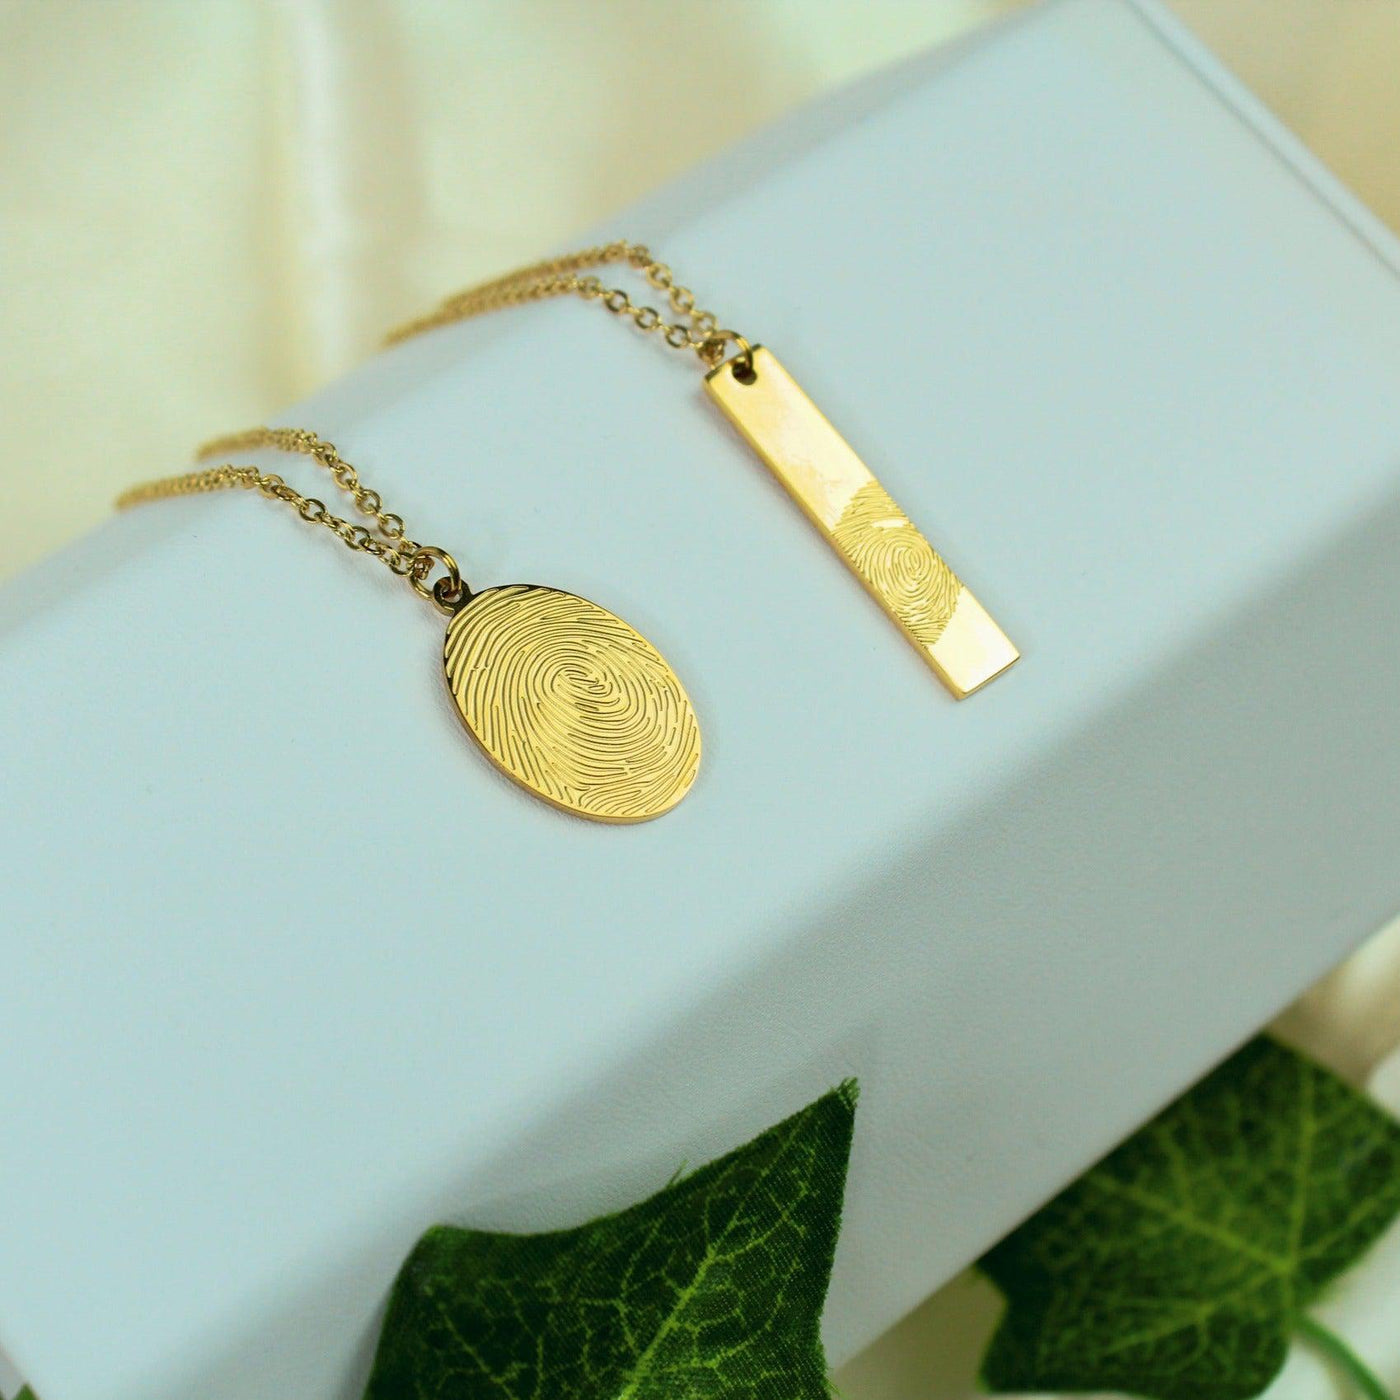 Solid Gold and Silver Fingerprint Jewellery. Luxury Personalised Gifts